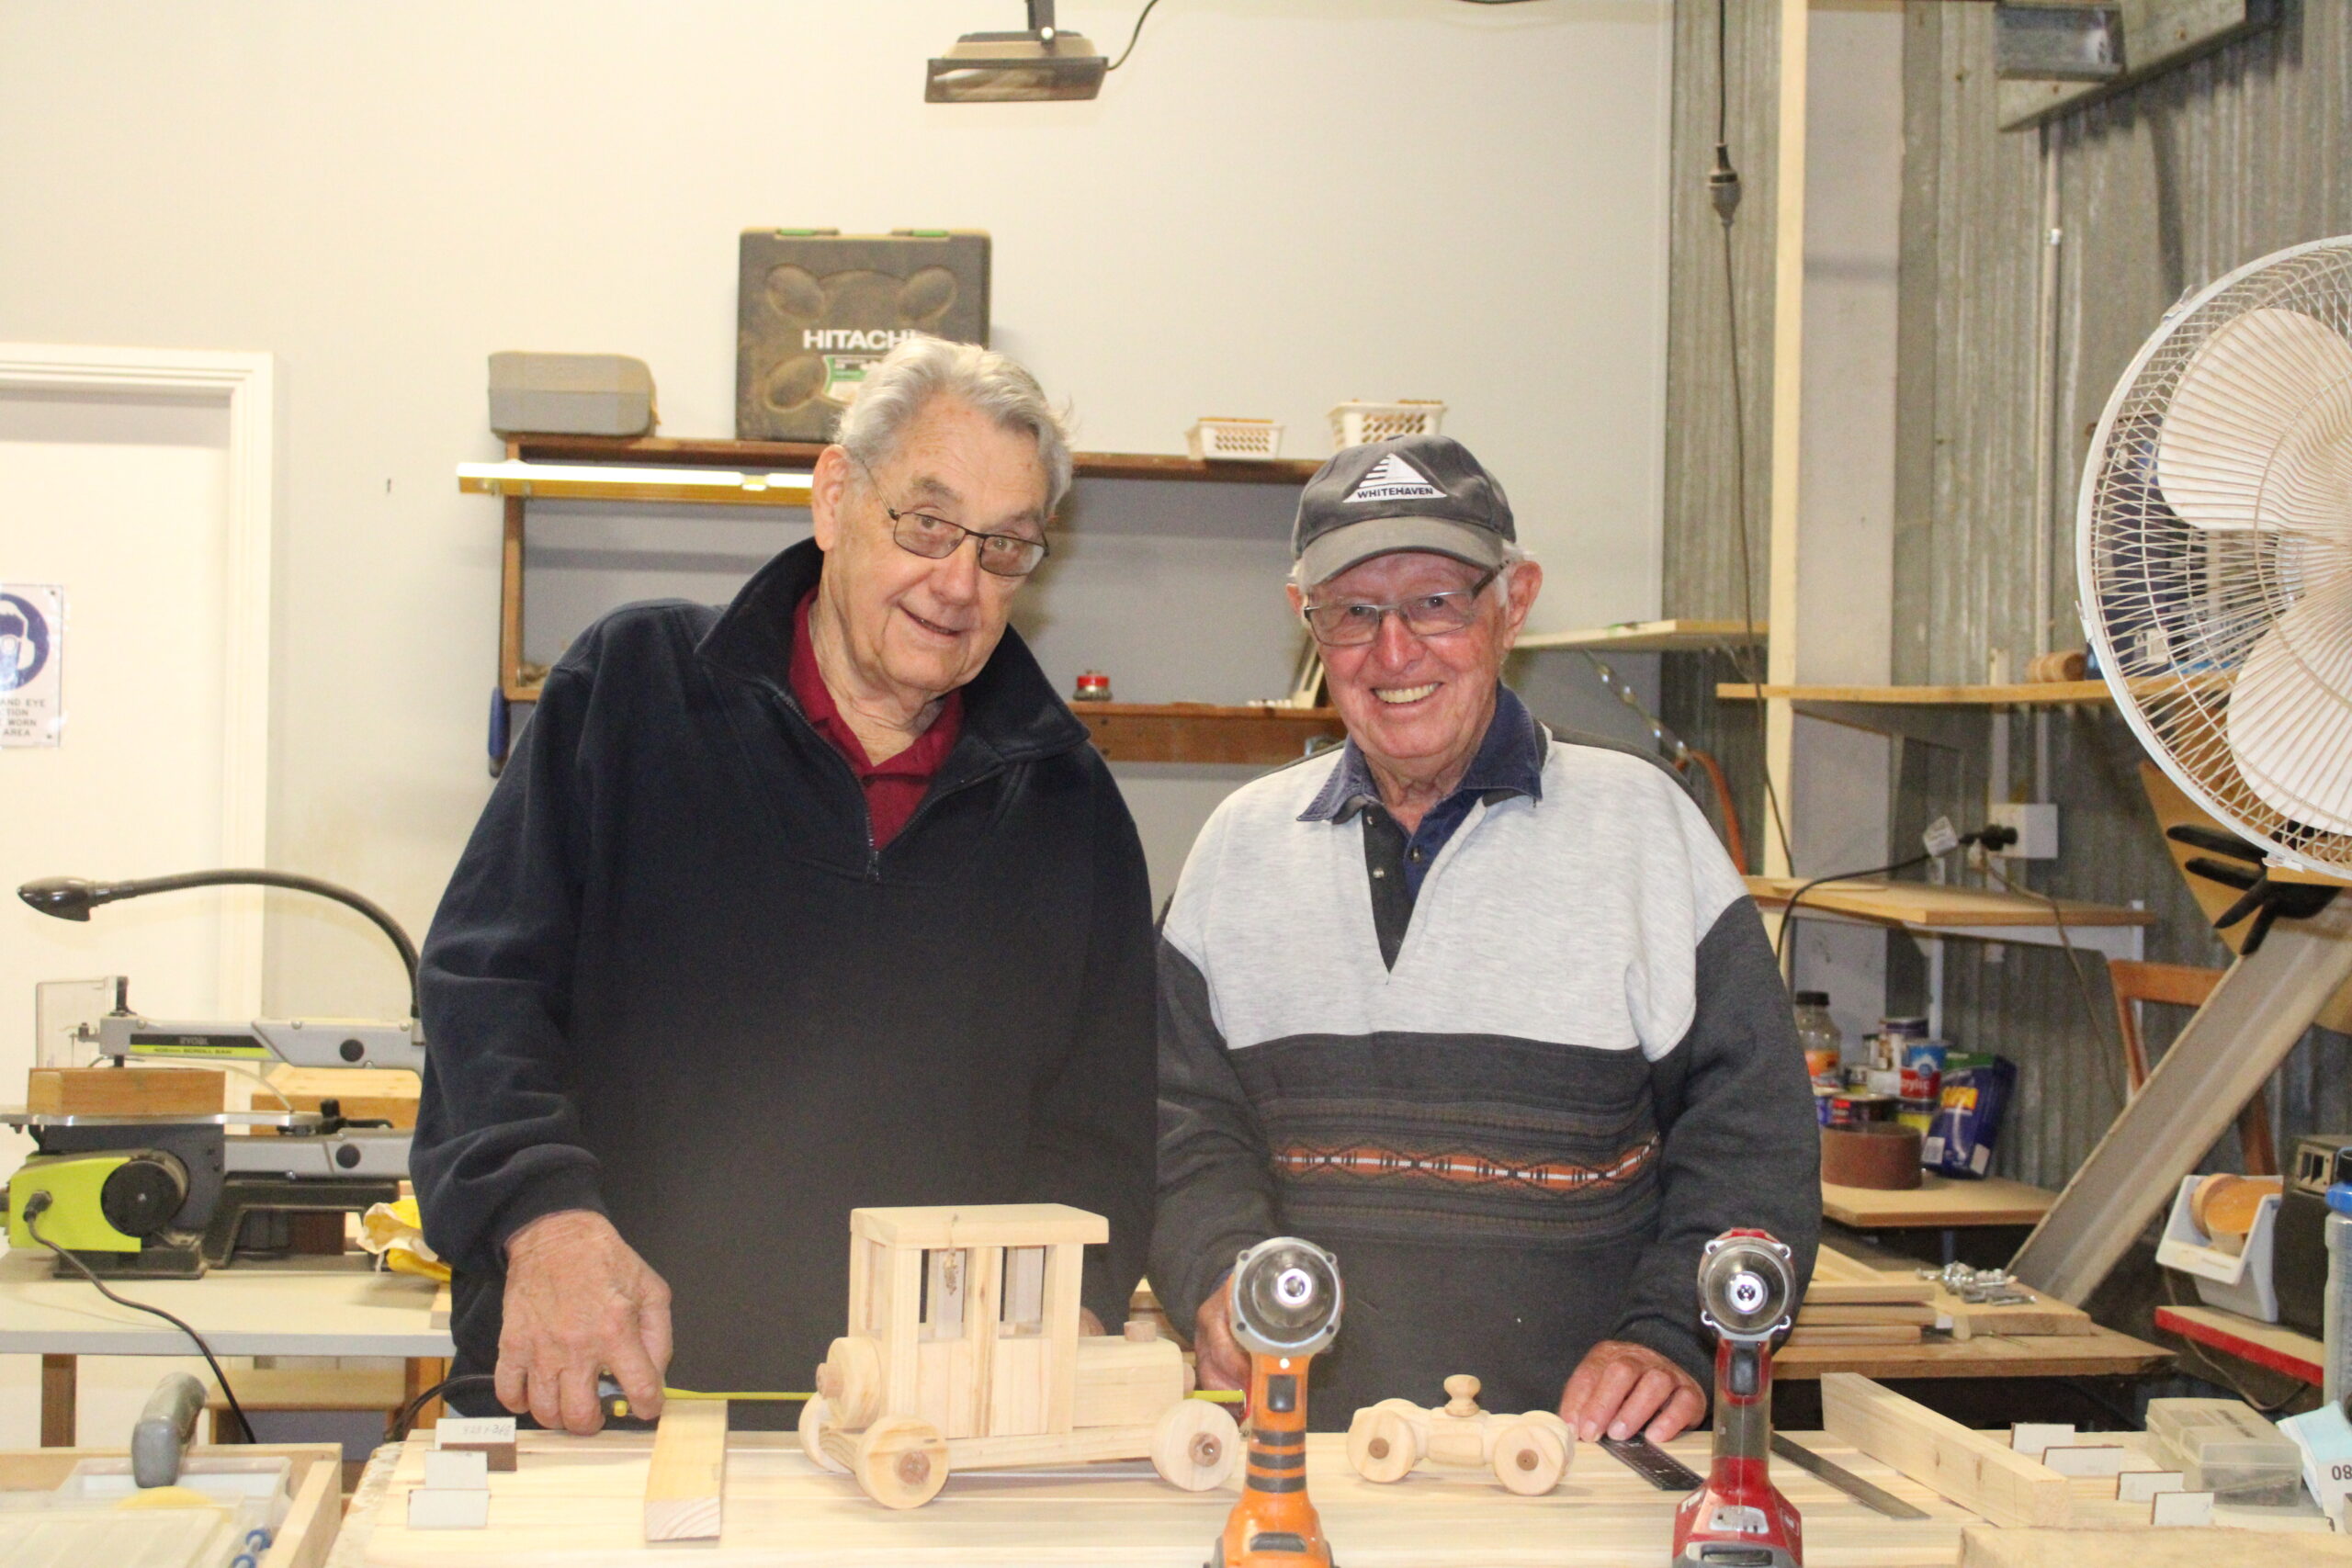 President Peter Hammond with Barry Shepherd in the woodworking room.